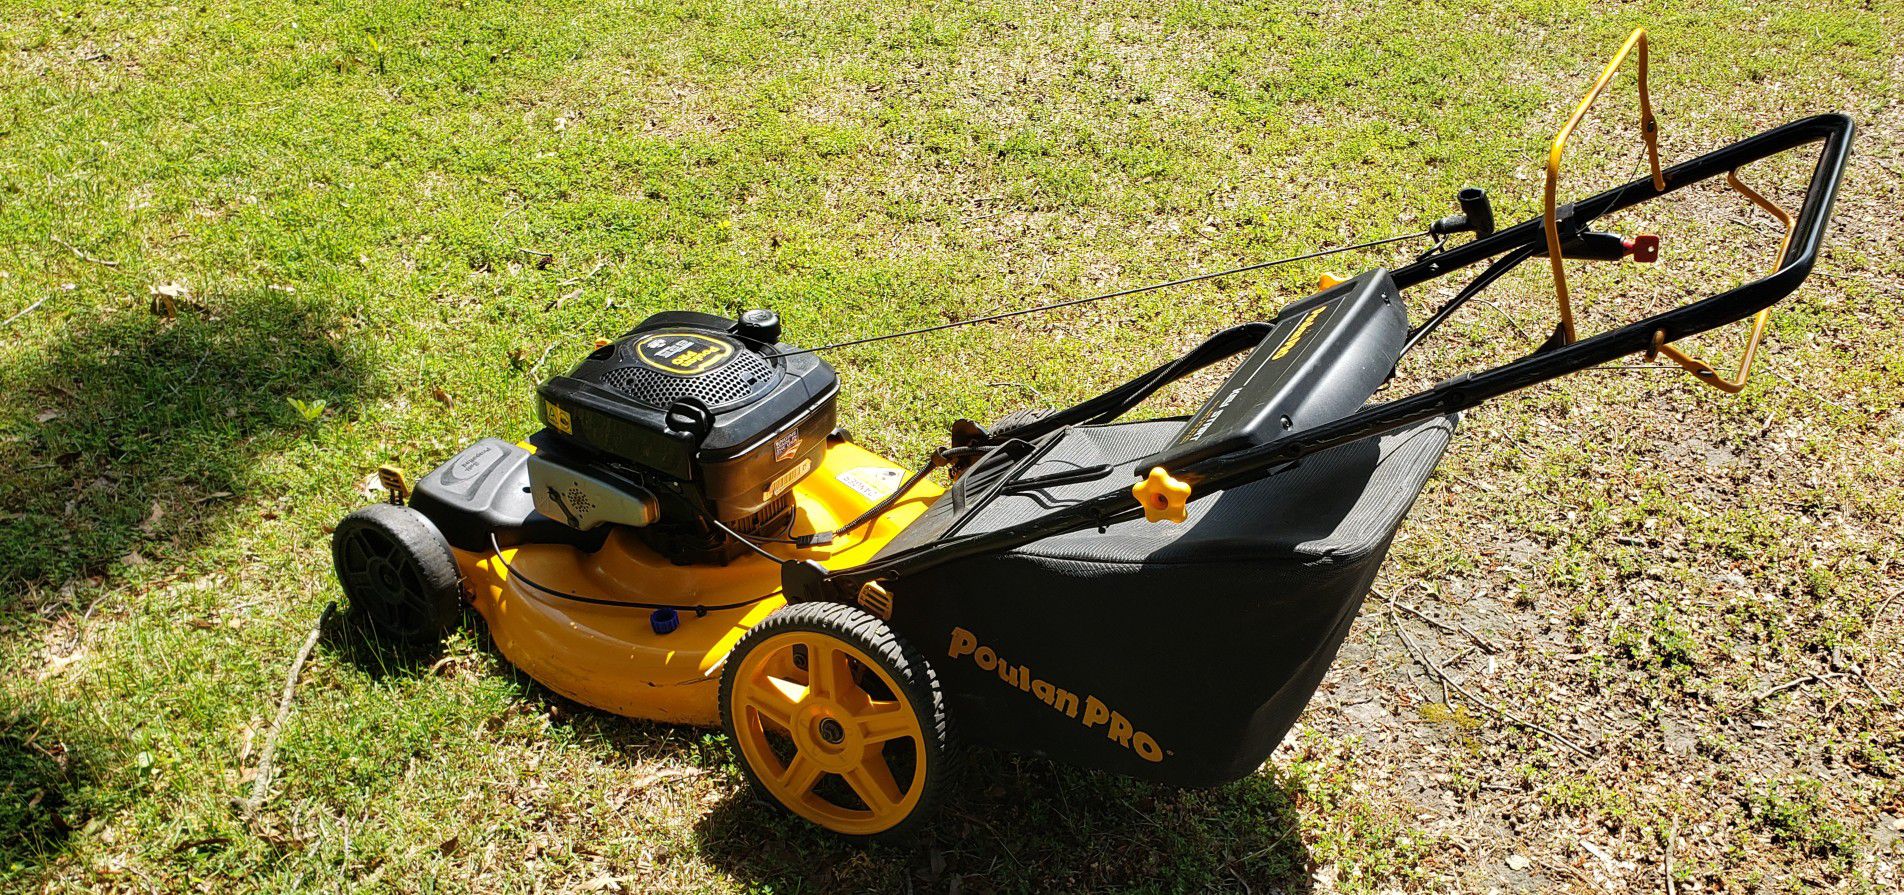 Poulan Pro 190cc 21" high wheel self propelled gas lawnmower with electric key start technology